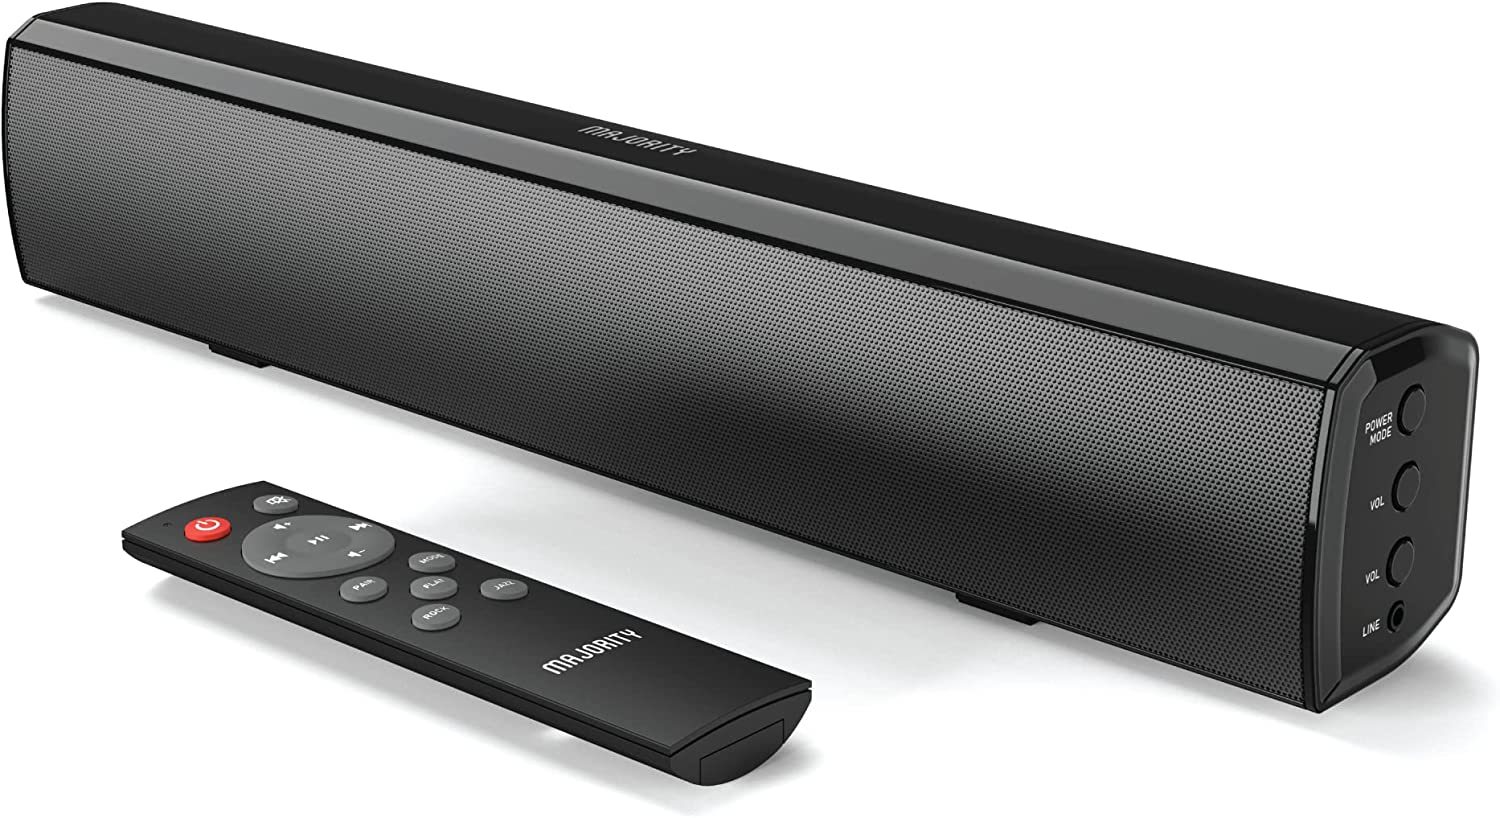 15-Inch, 50-Watt Majority Bowfell Small Sound Bar With, And Projectors. - $51.96